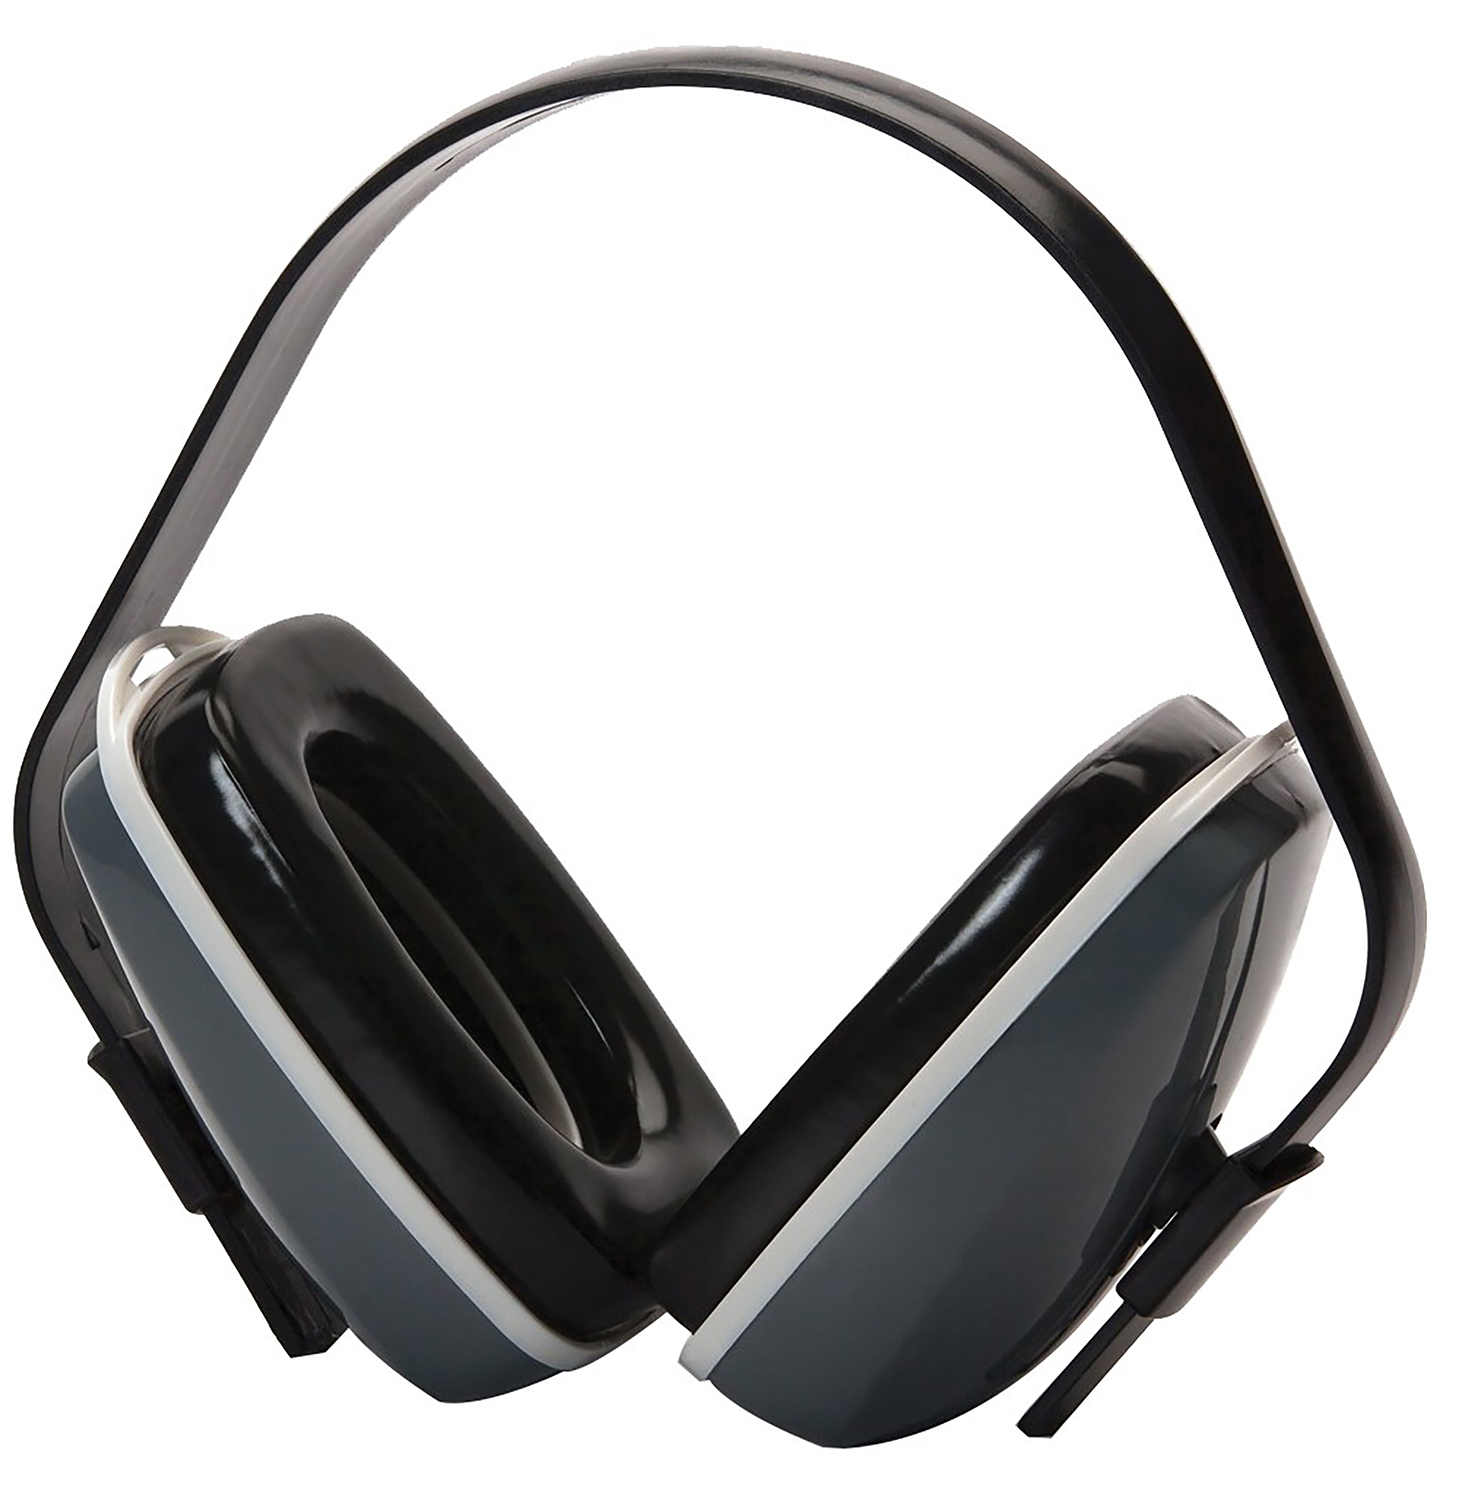 Pyramex PM2010 Ear Muff  22 dB Over the Head Gray Ear Cups with Black Headband for Adults 1 Pair